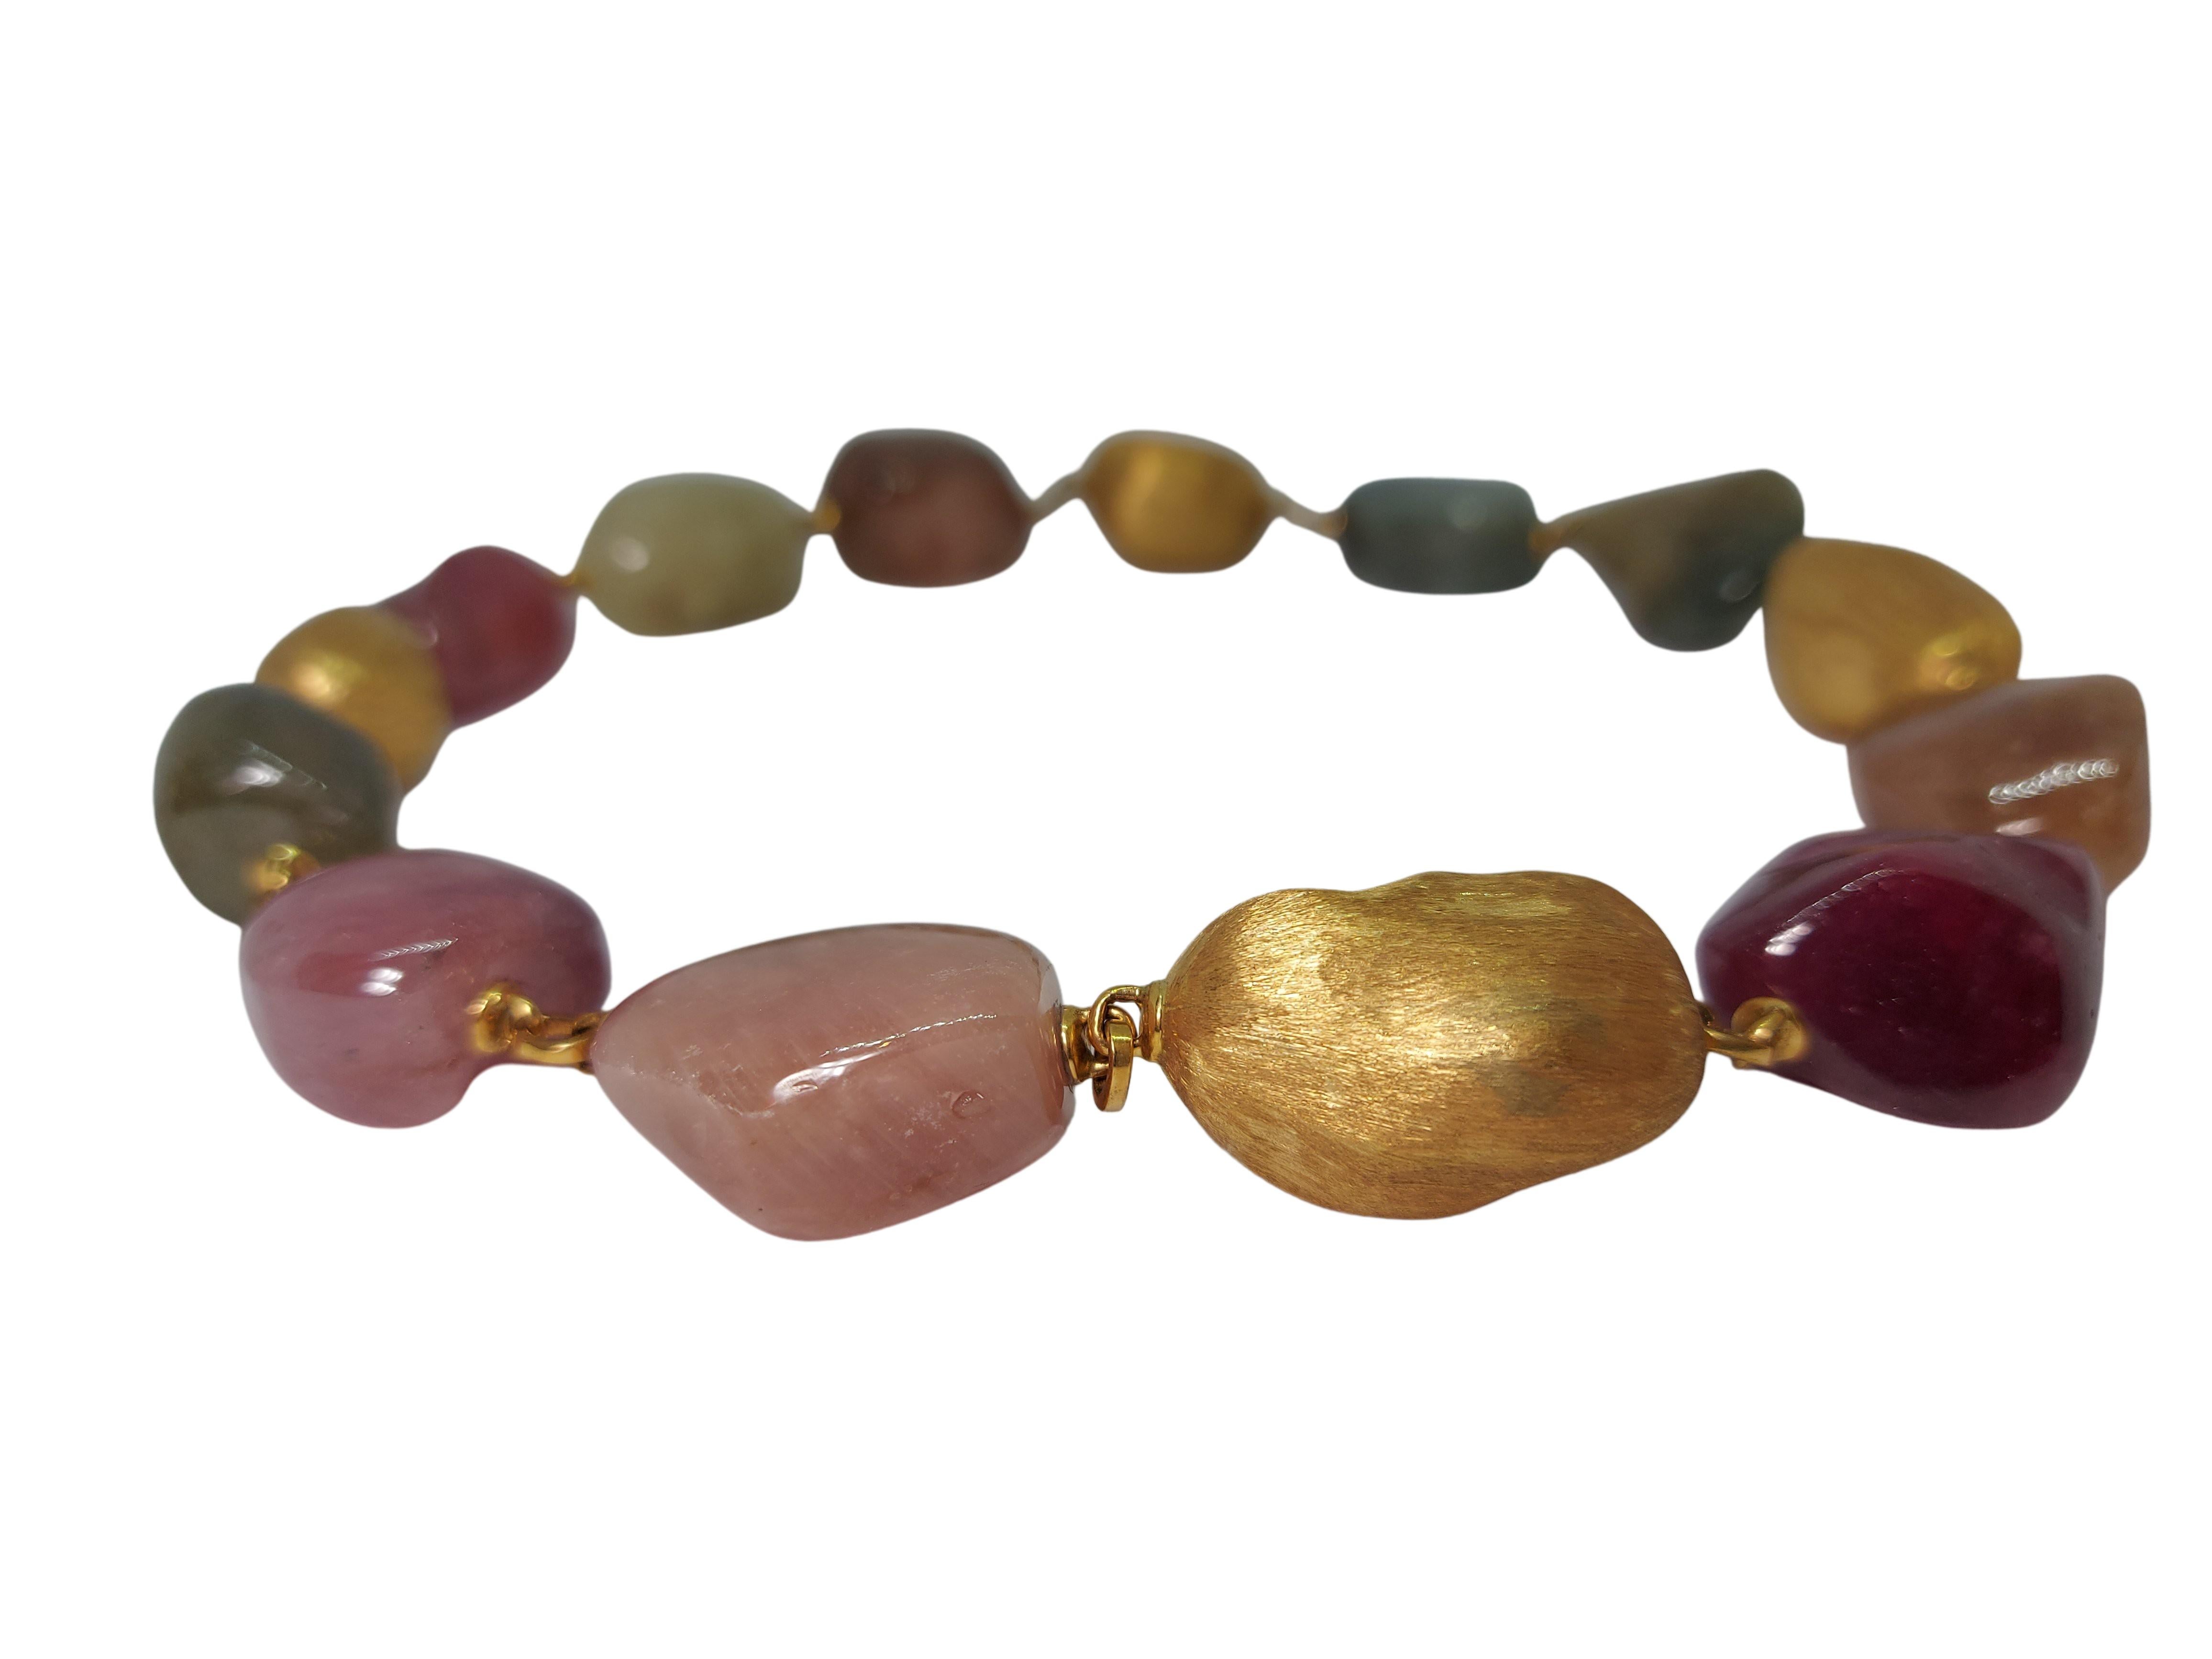 Artisan 920 Carat Rough Natural Sapphires and 18 kt Gold Yvel Necklace, Bracelet, Ring For Sale